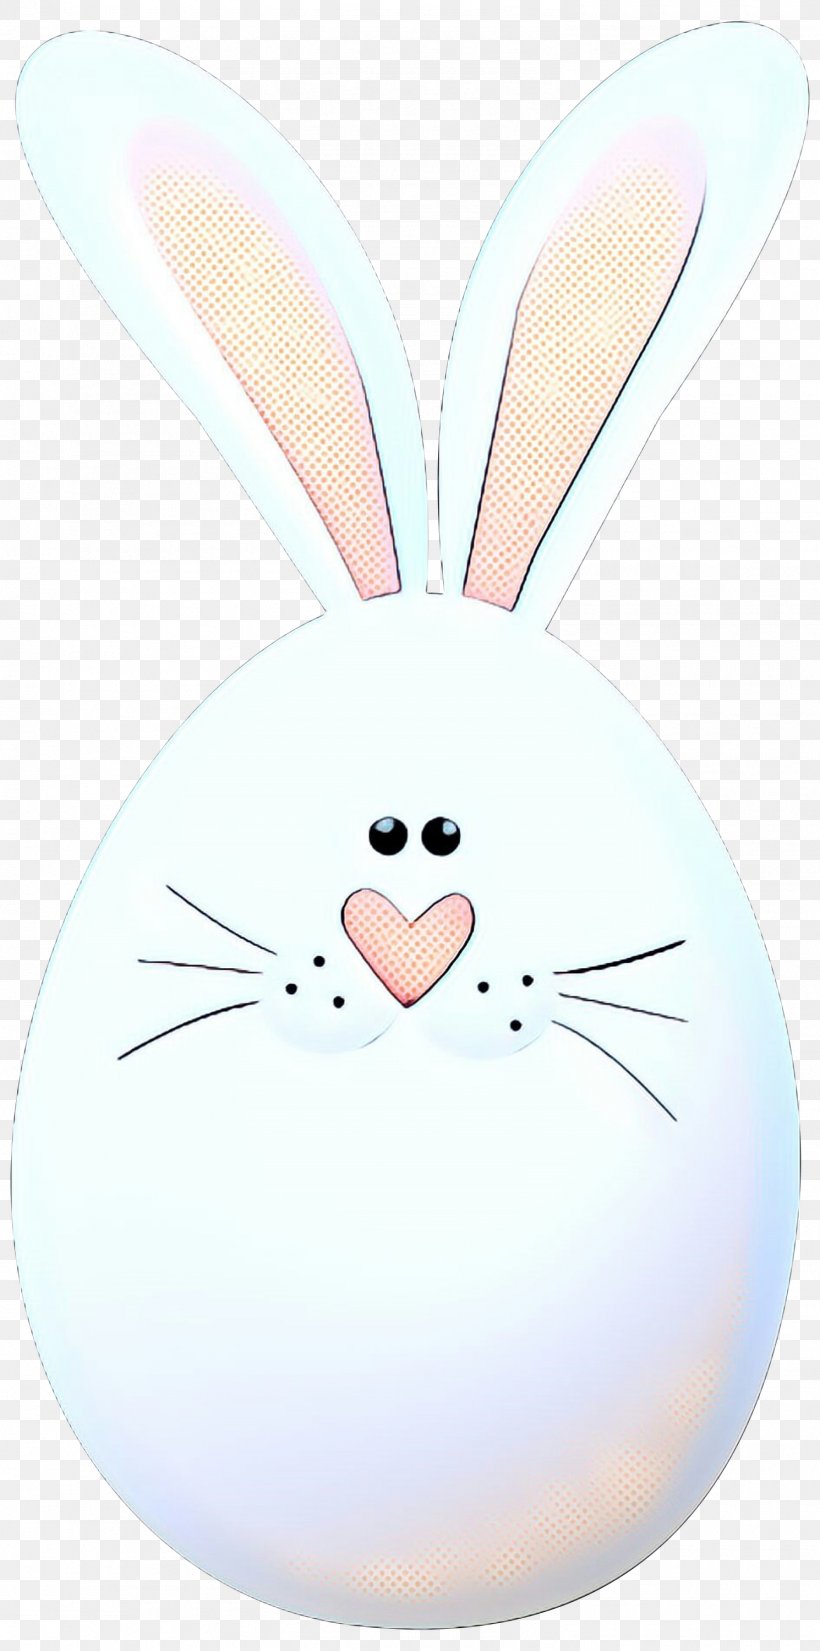 Rabbit Easter Bunny Hare Illustration Whiskers, PNG, 1490x3000px, Rabbit, Cartoon, Easter, Easter Bunny, Hare Download Free